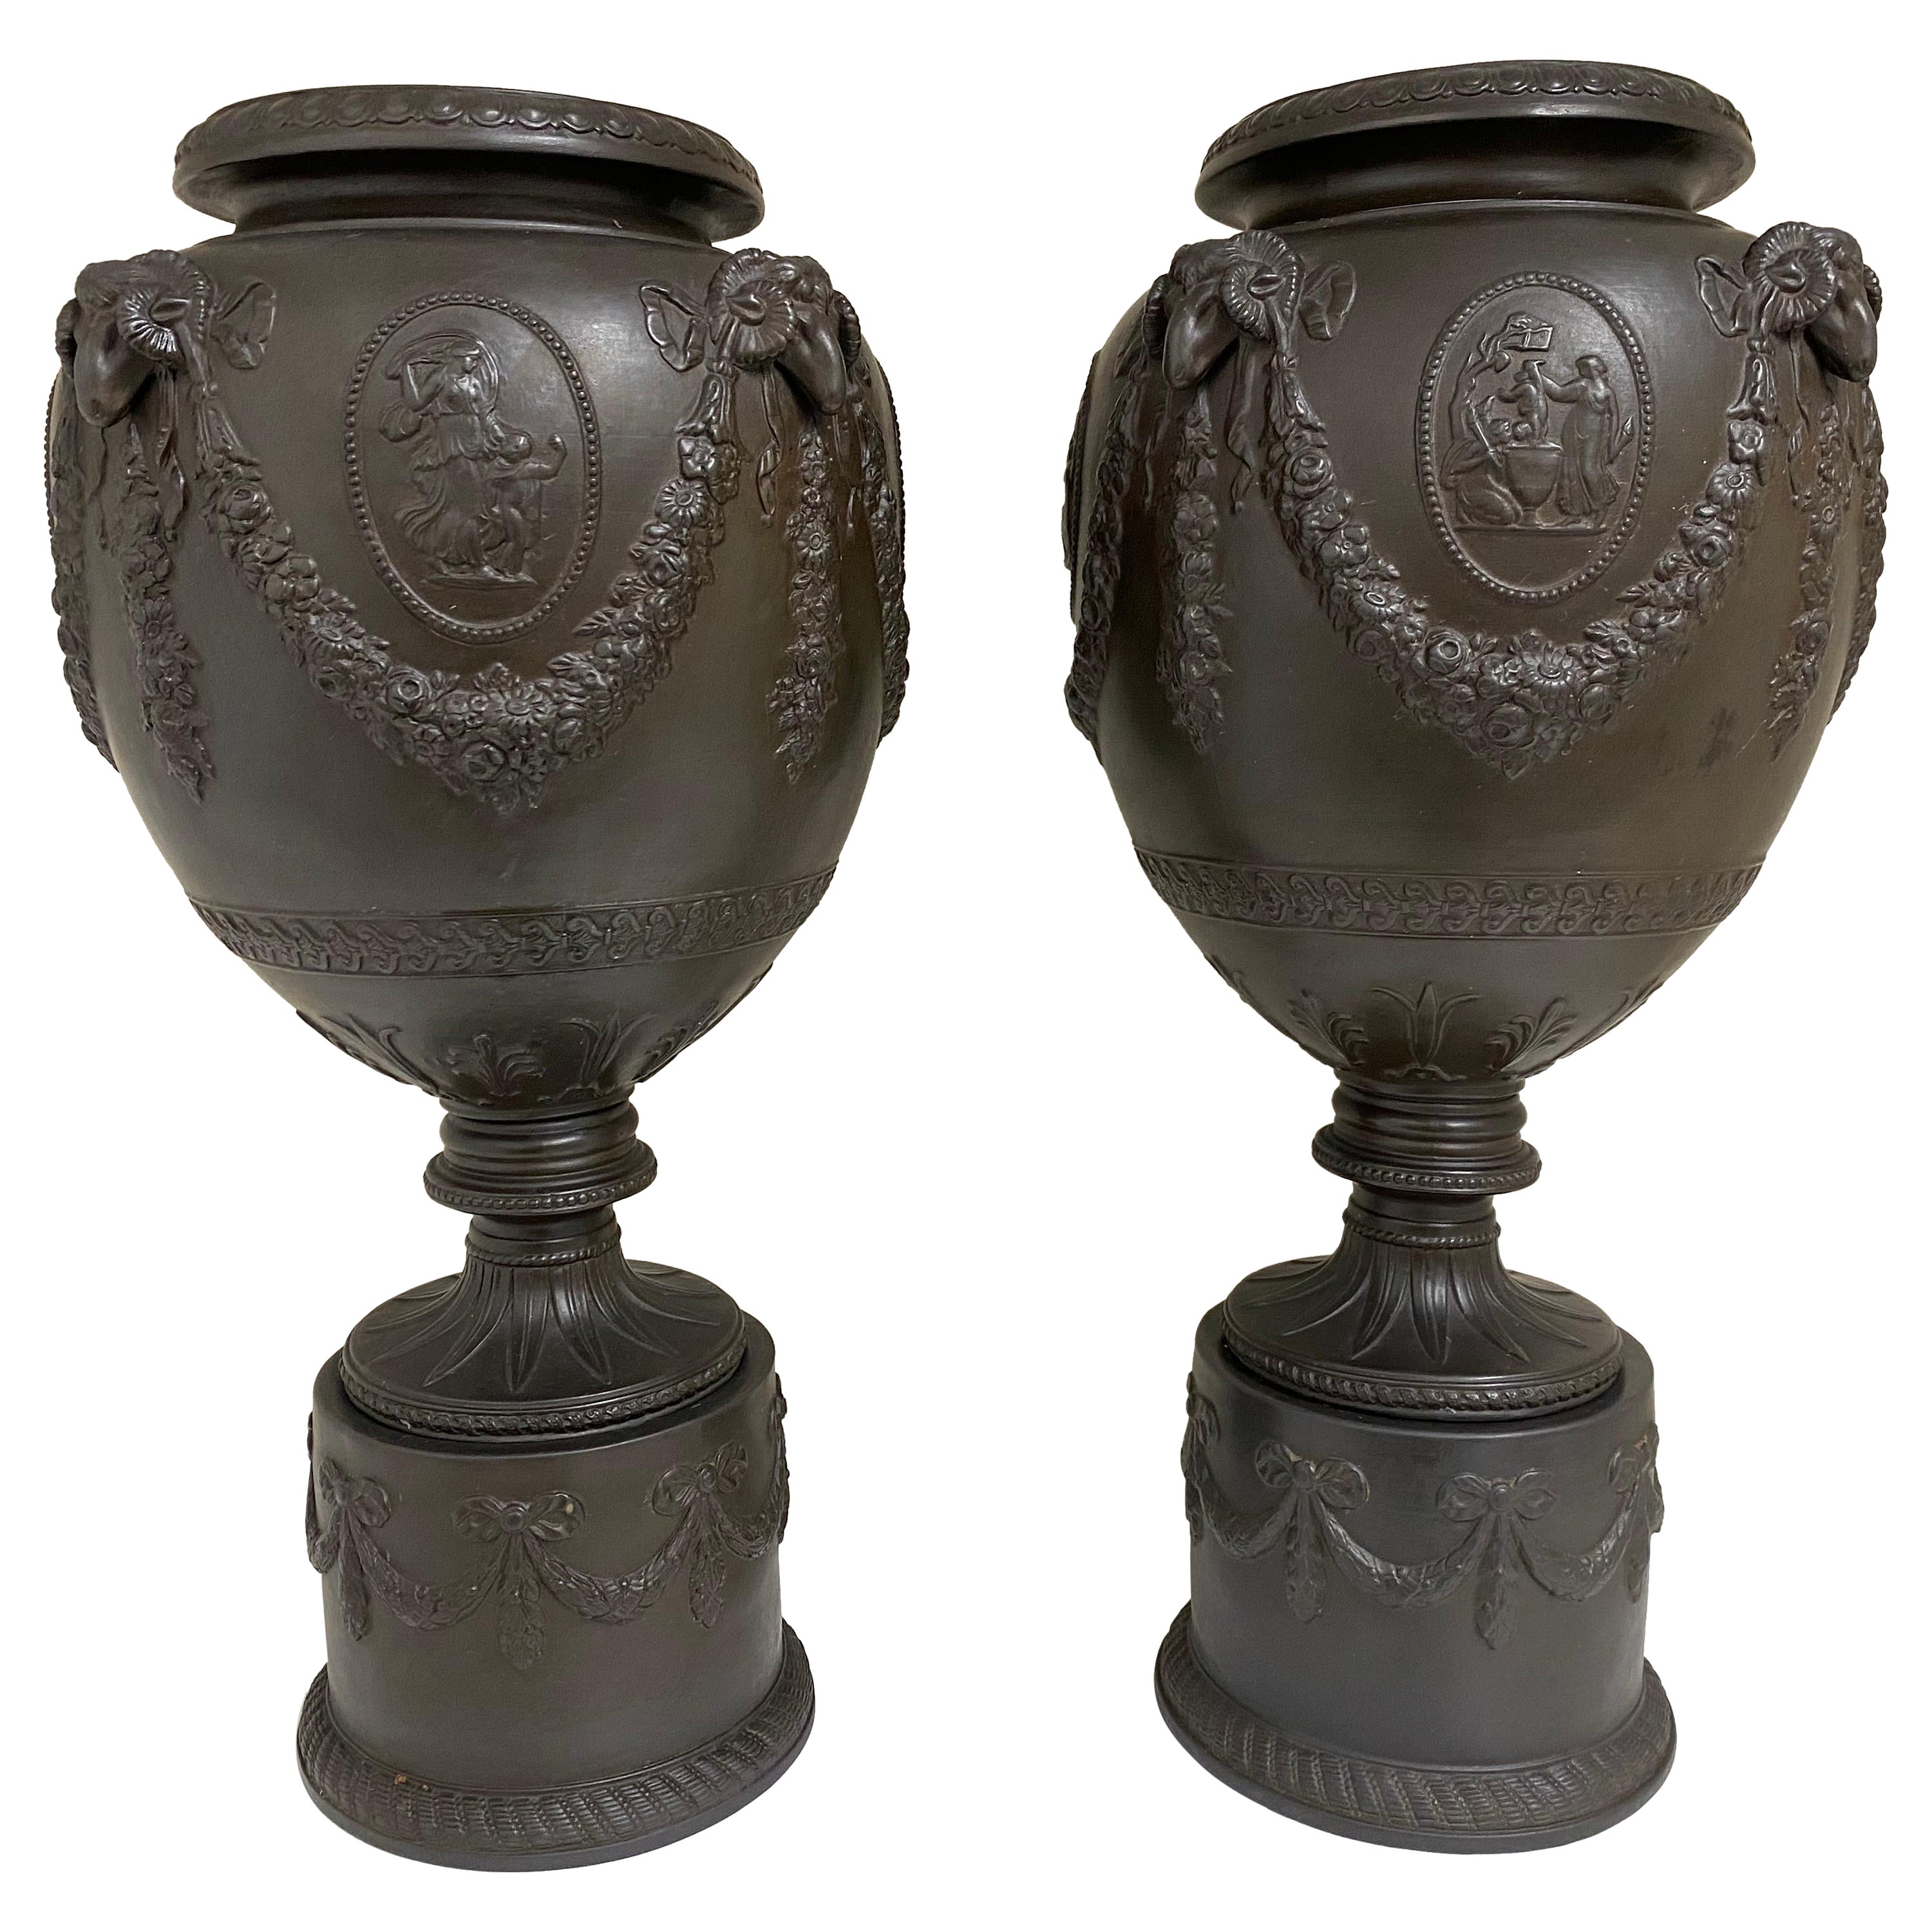 Pair of Ceramic Basalt Relief Urns Attributed to Wedgwood